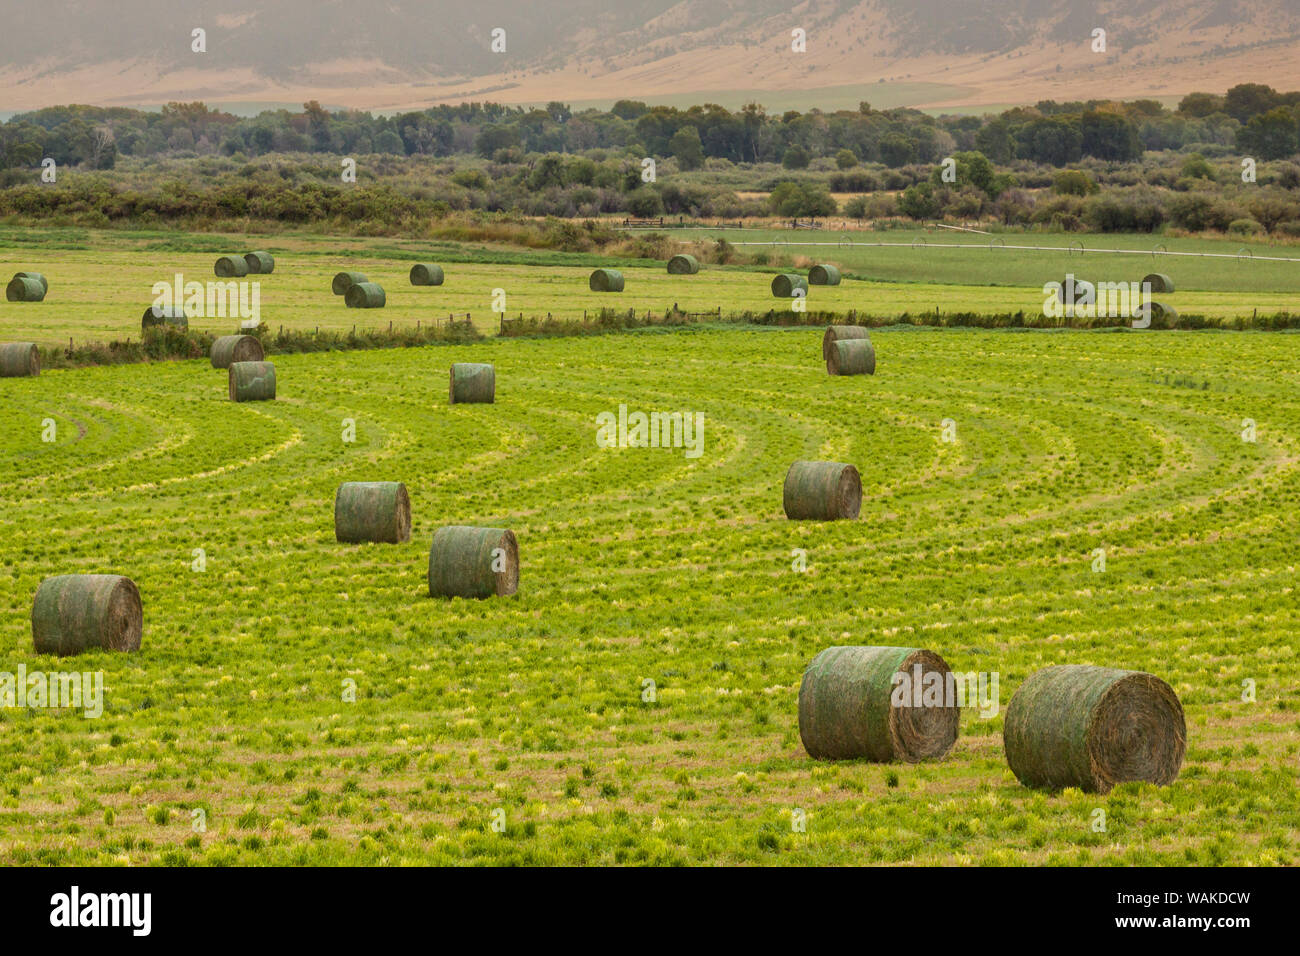 Usa, Montana. Bales, or Rounds, of hay in a field that has just been harvested. Stock Photo